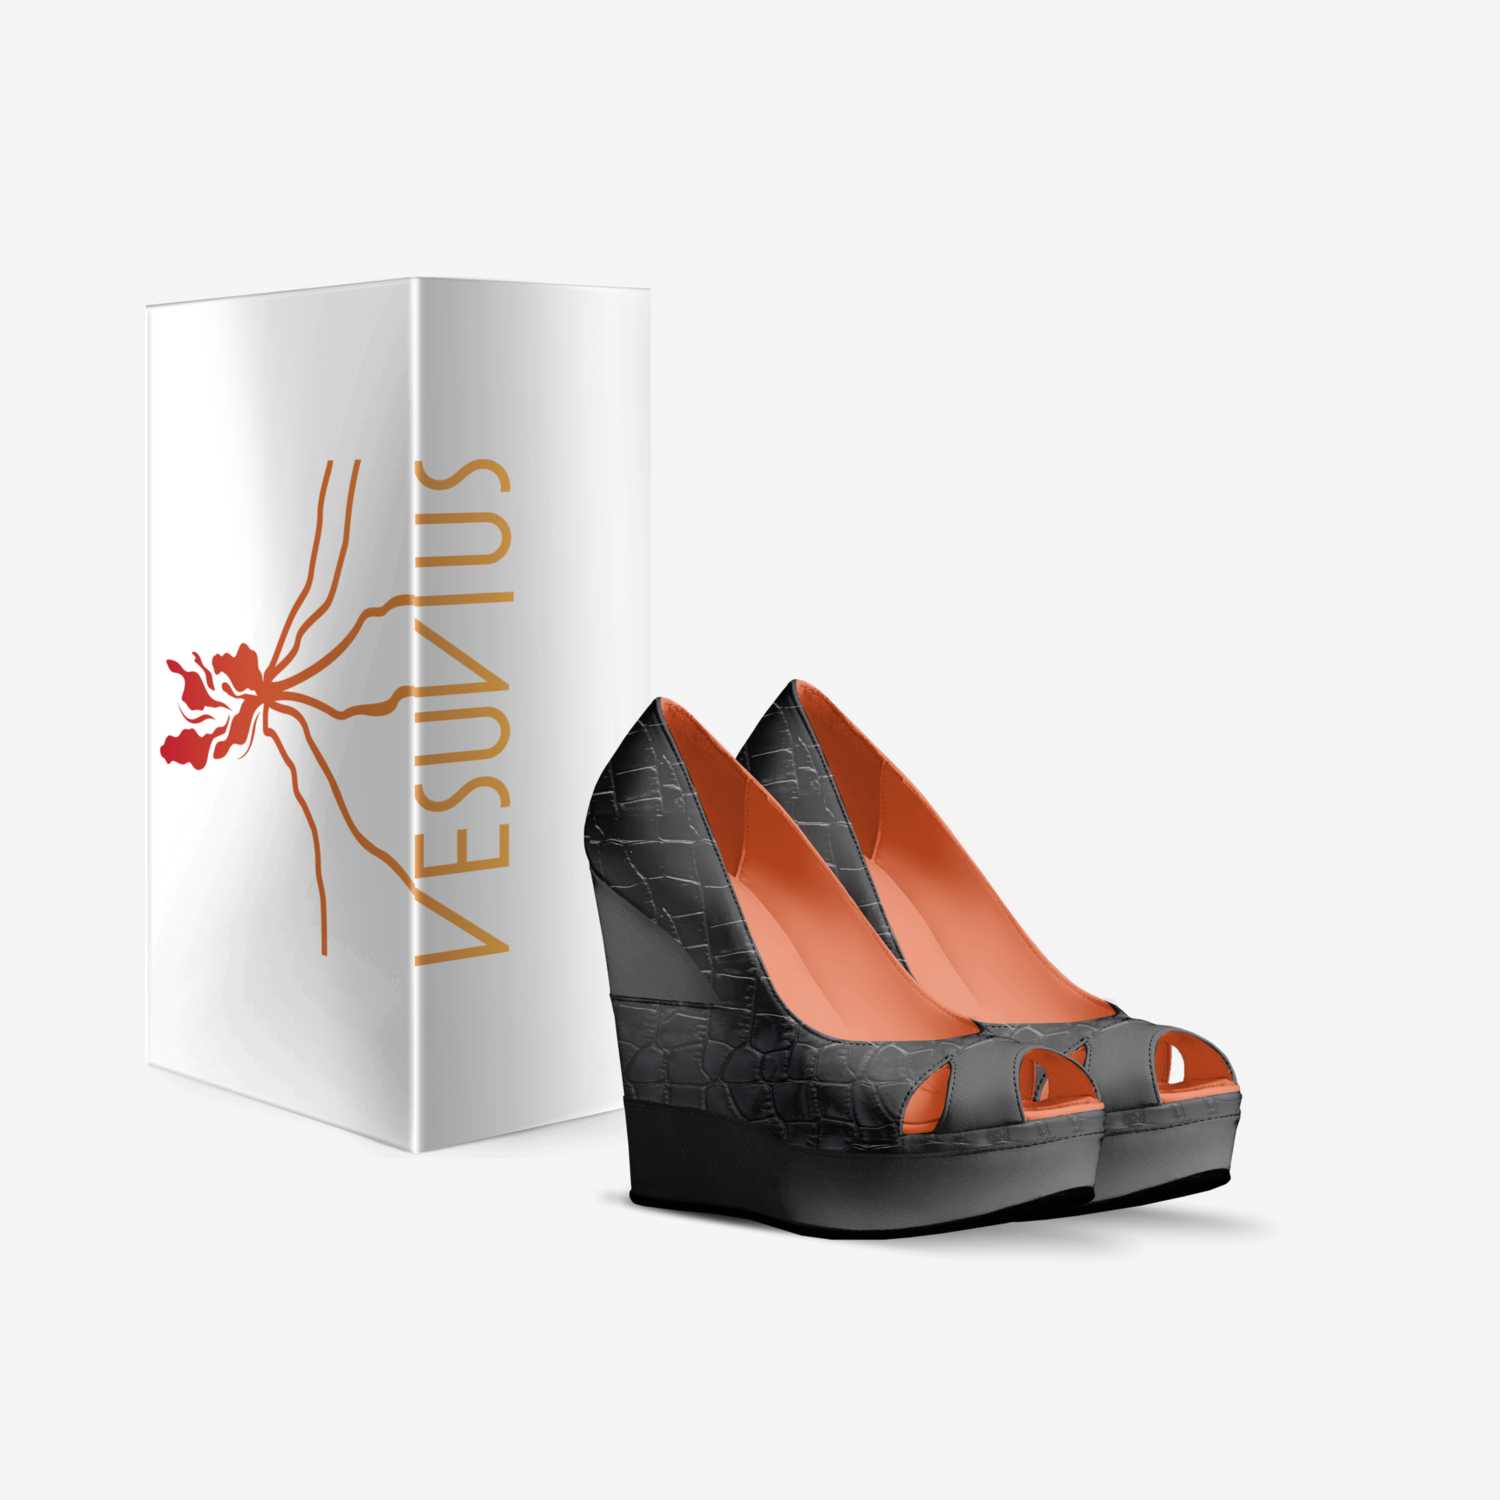 Chiara by Vesuvius custom made in Italy shoes by Tiffany Kaplan | Box view